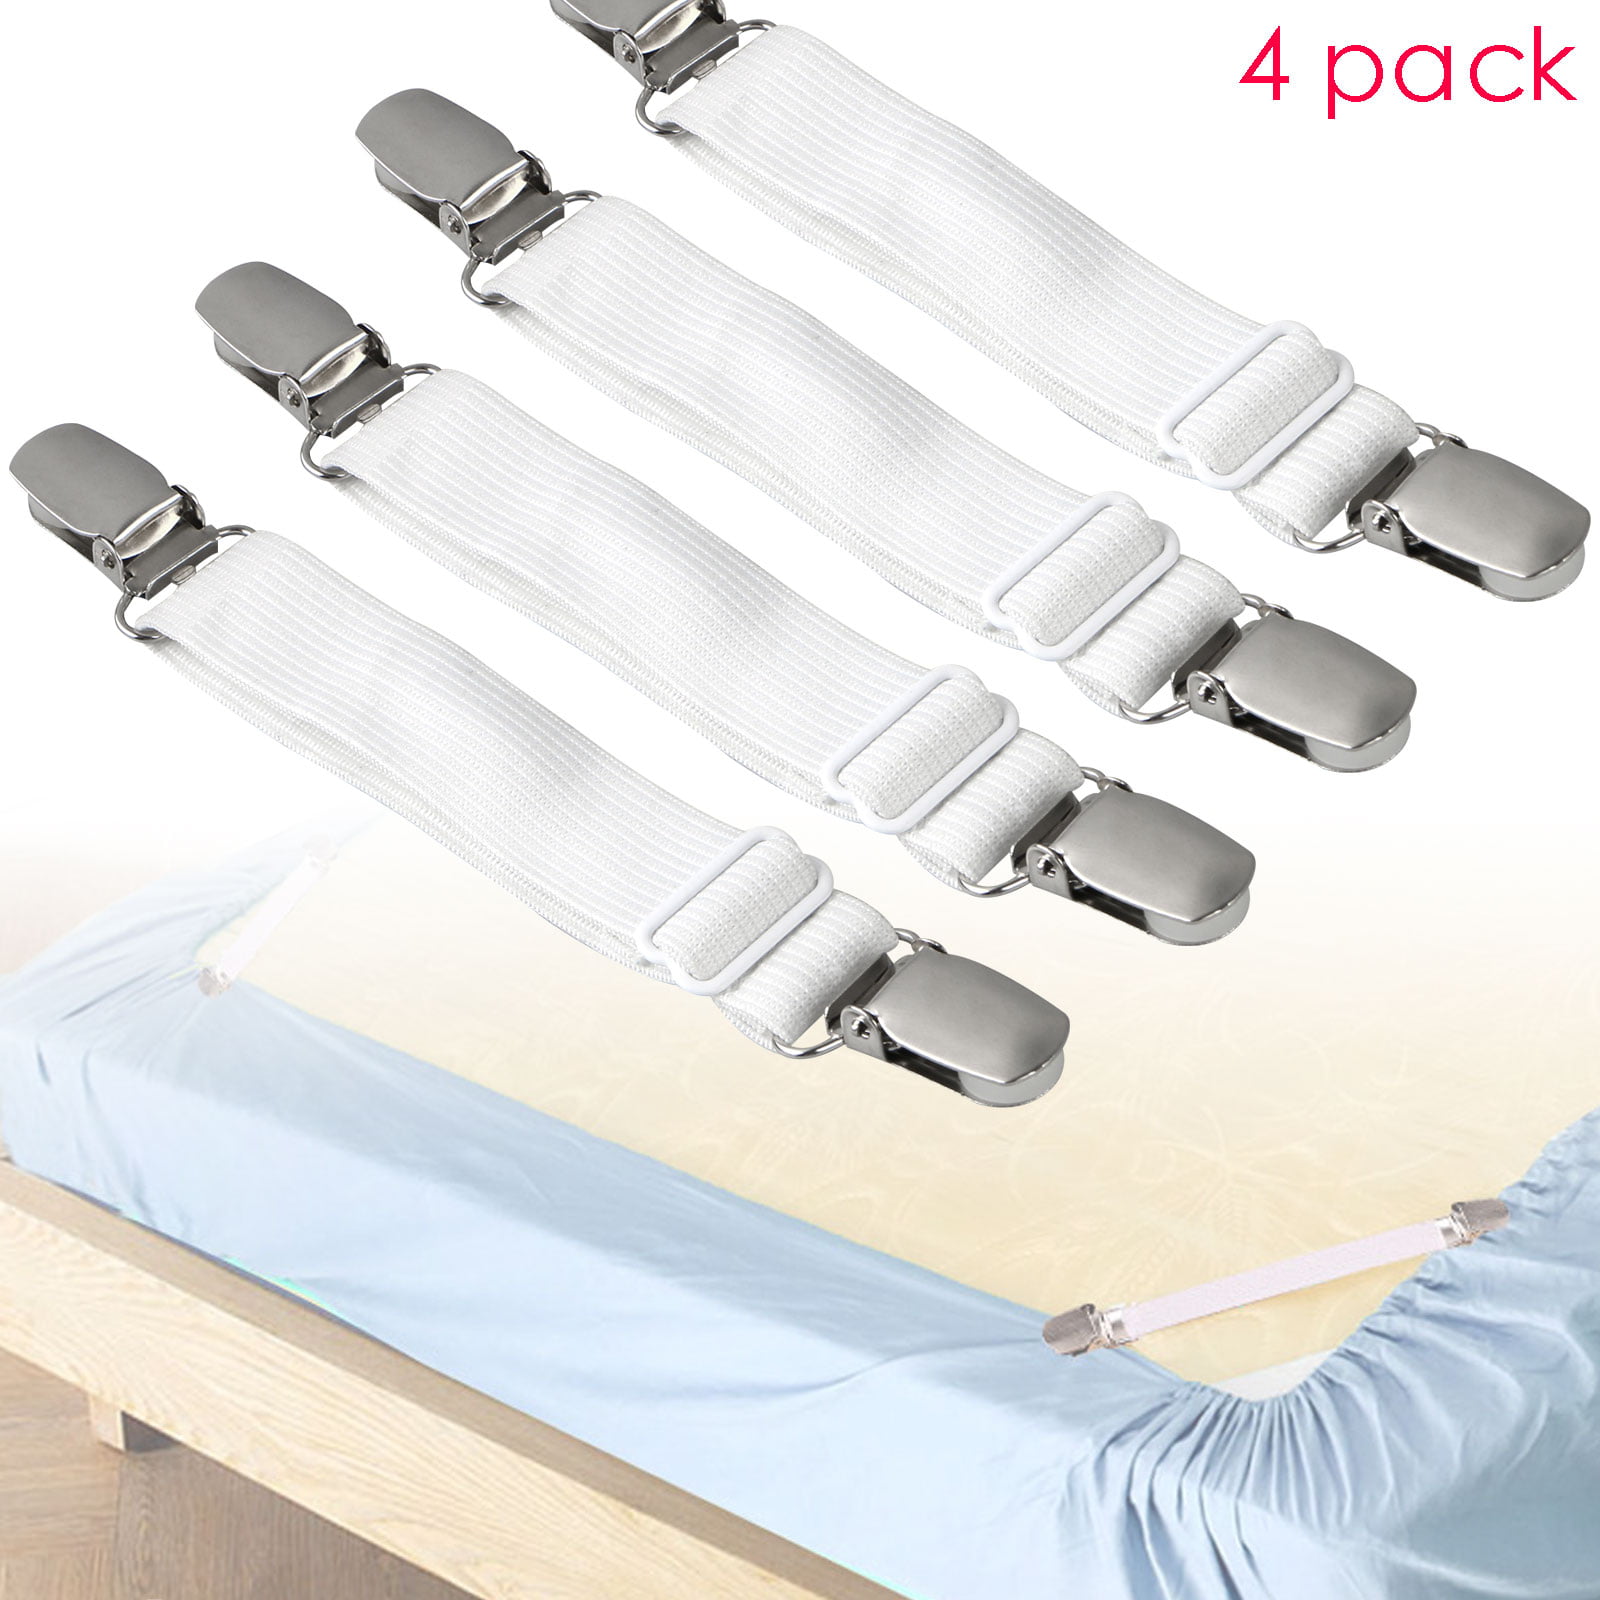 4pcs Adjustable Bed Sheet Straps Holders Fasteners Grippers Clips Suspenders Set 